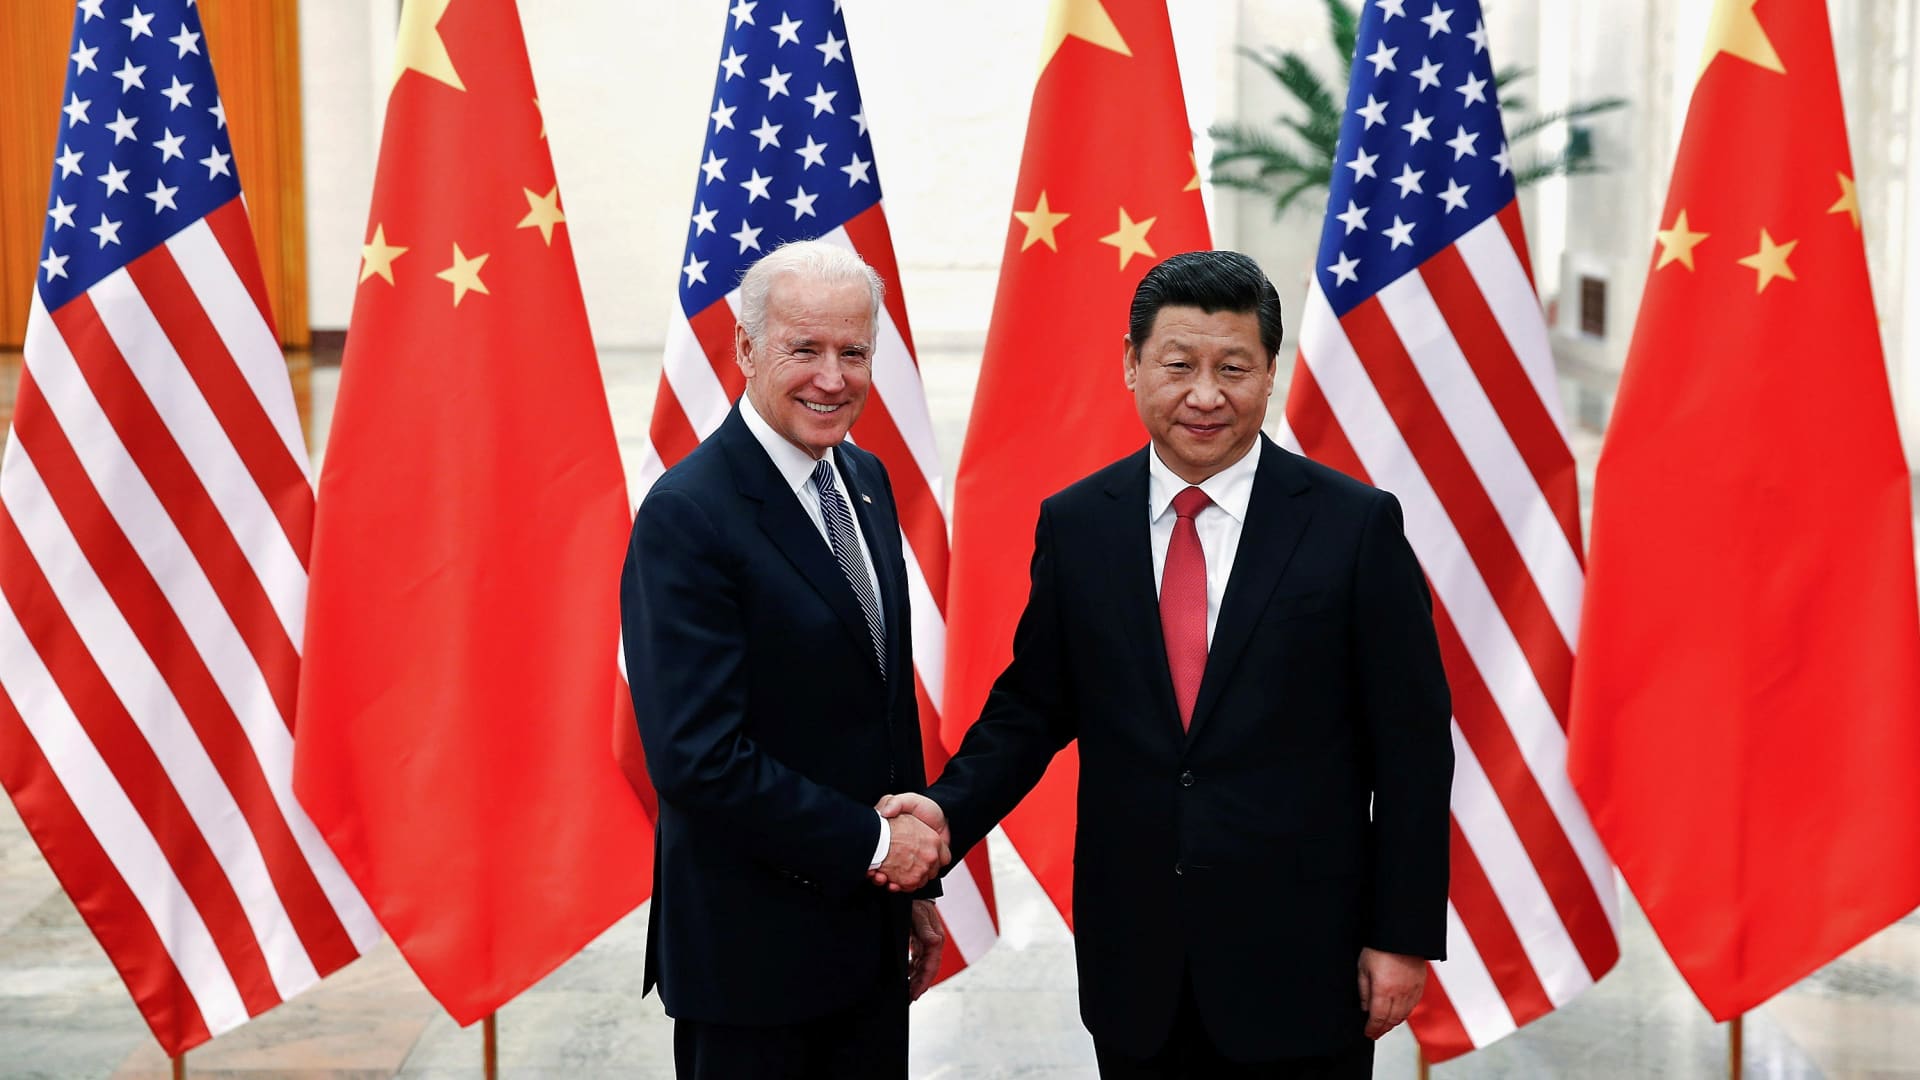 Former U.S. ambassador says lifting China tariffs could slash inflation by 1% over time, help Biden in midterms